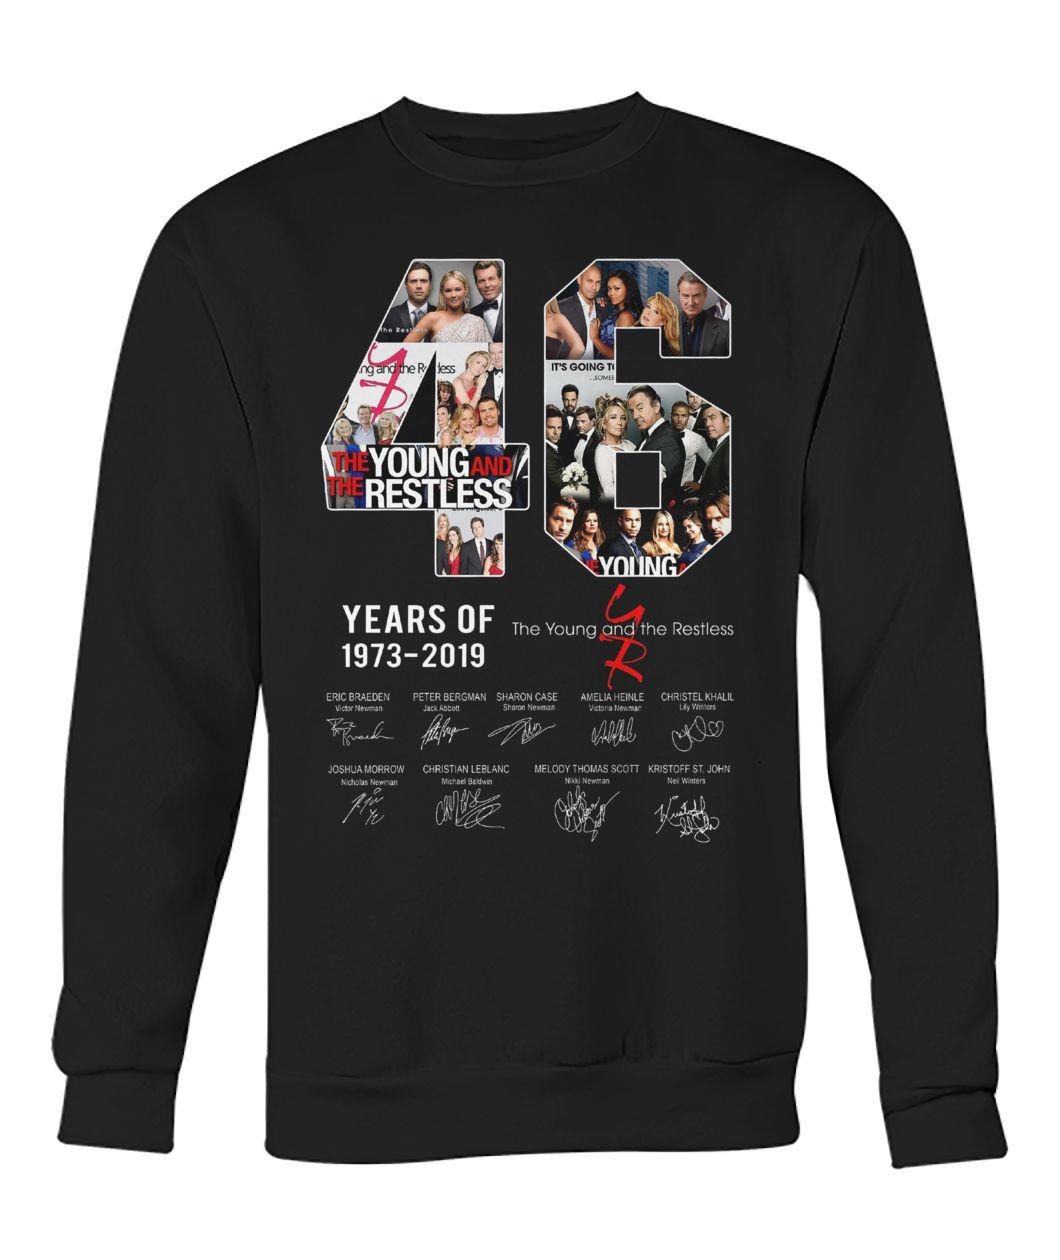 46 years of the Young and the Restless sweatshirt